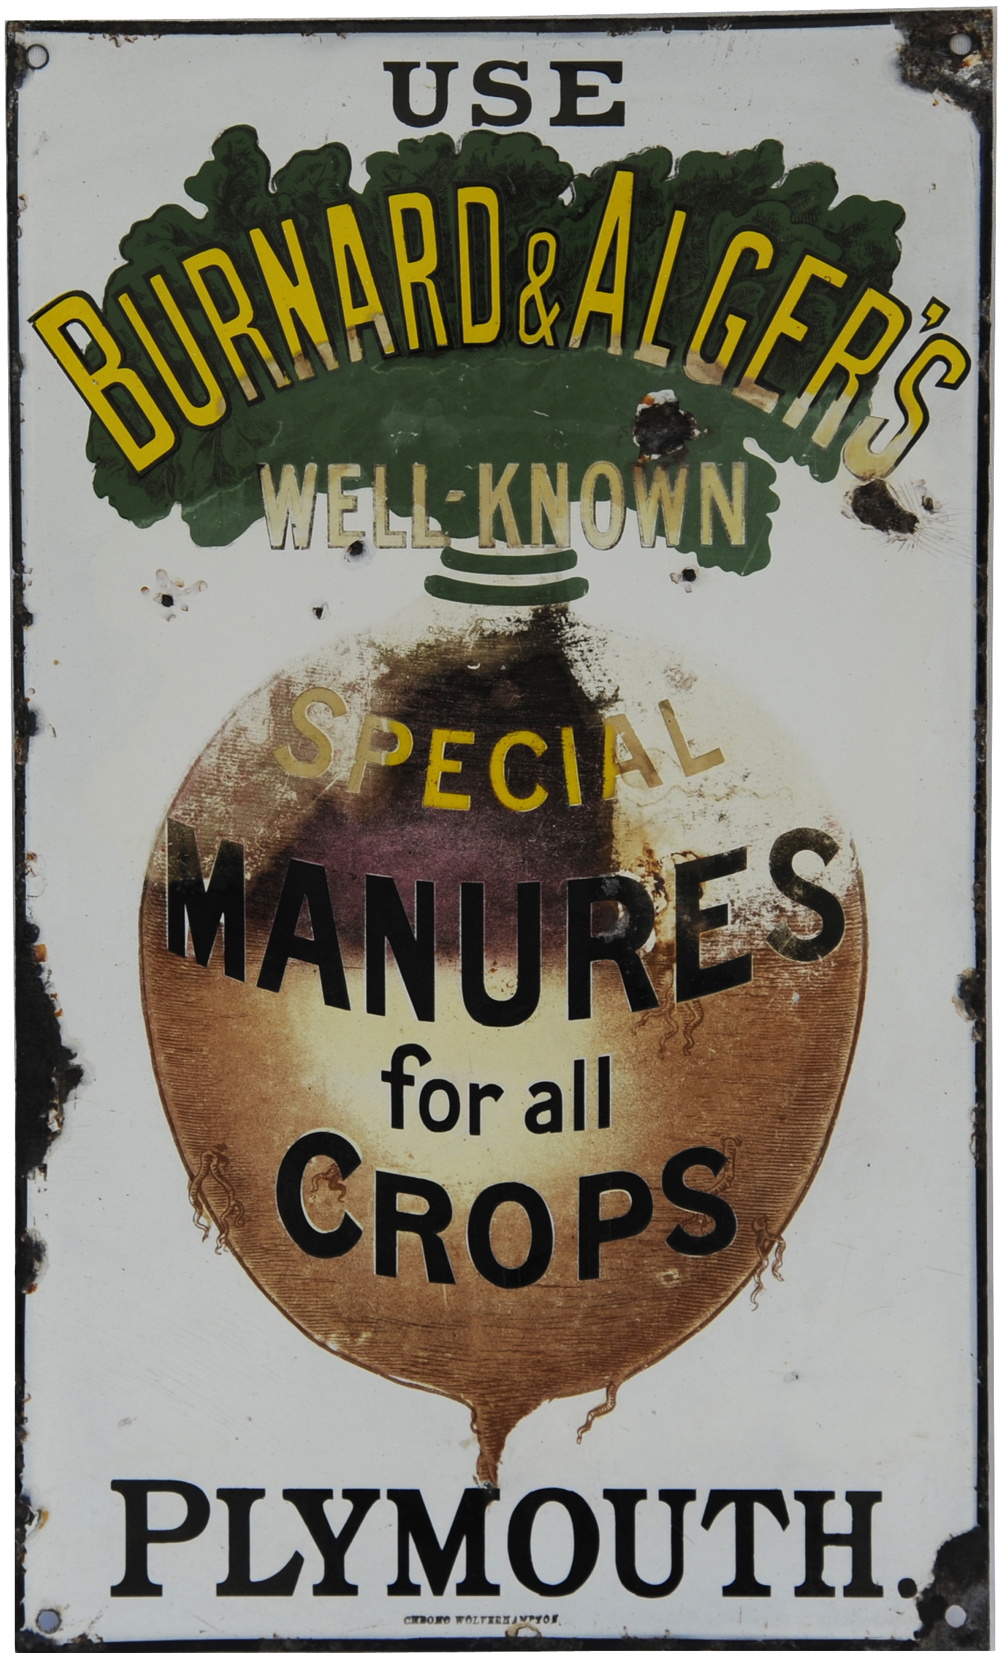 Enamel Advertising Sign `Use Bernard & Algers Well Known Special Manures For All Crops -